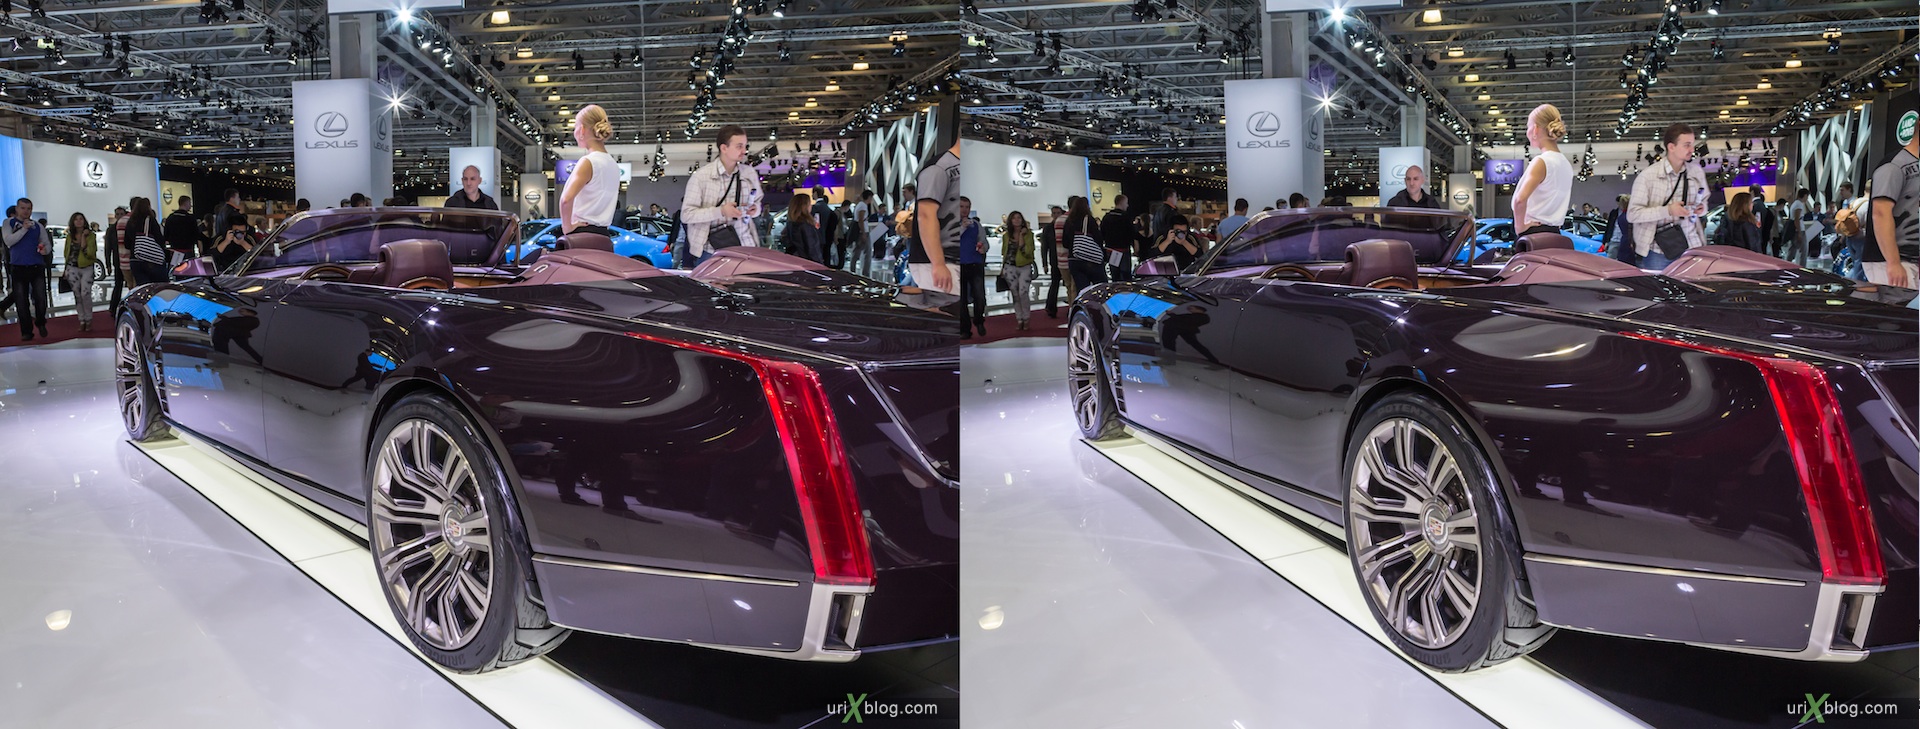 2012, Cadillac CIEL, Moscow International Automobile Salon, auto show, 3D, stereo pair, cross-eyed, crossview